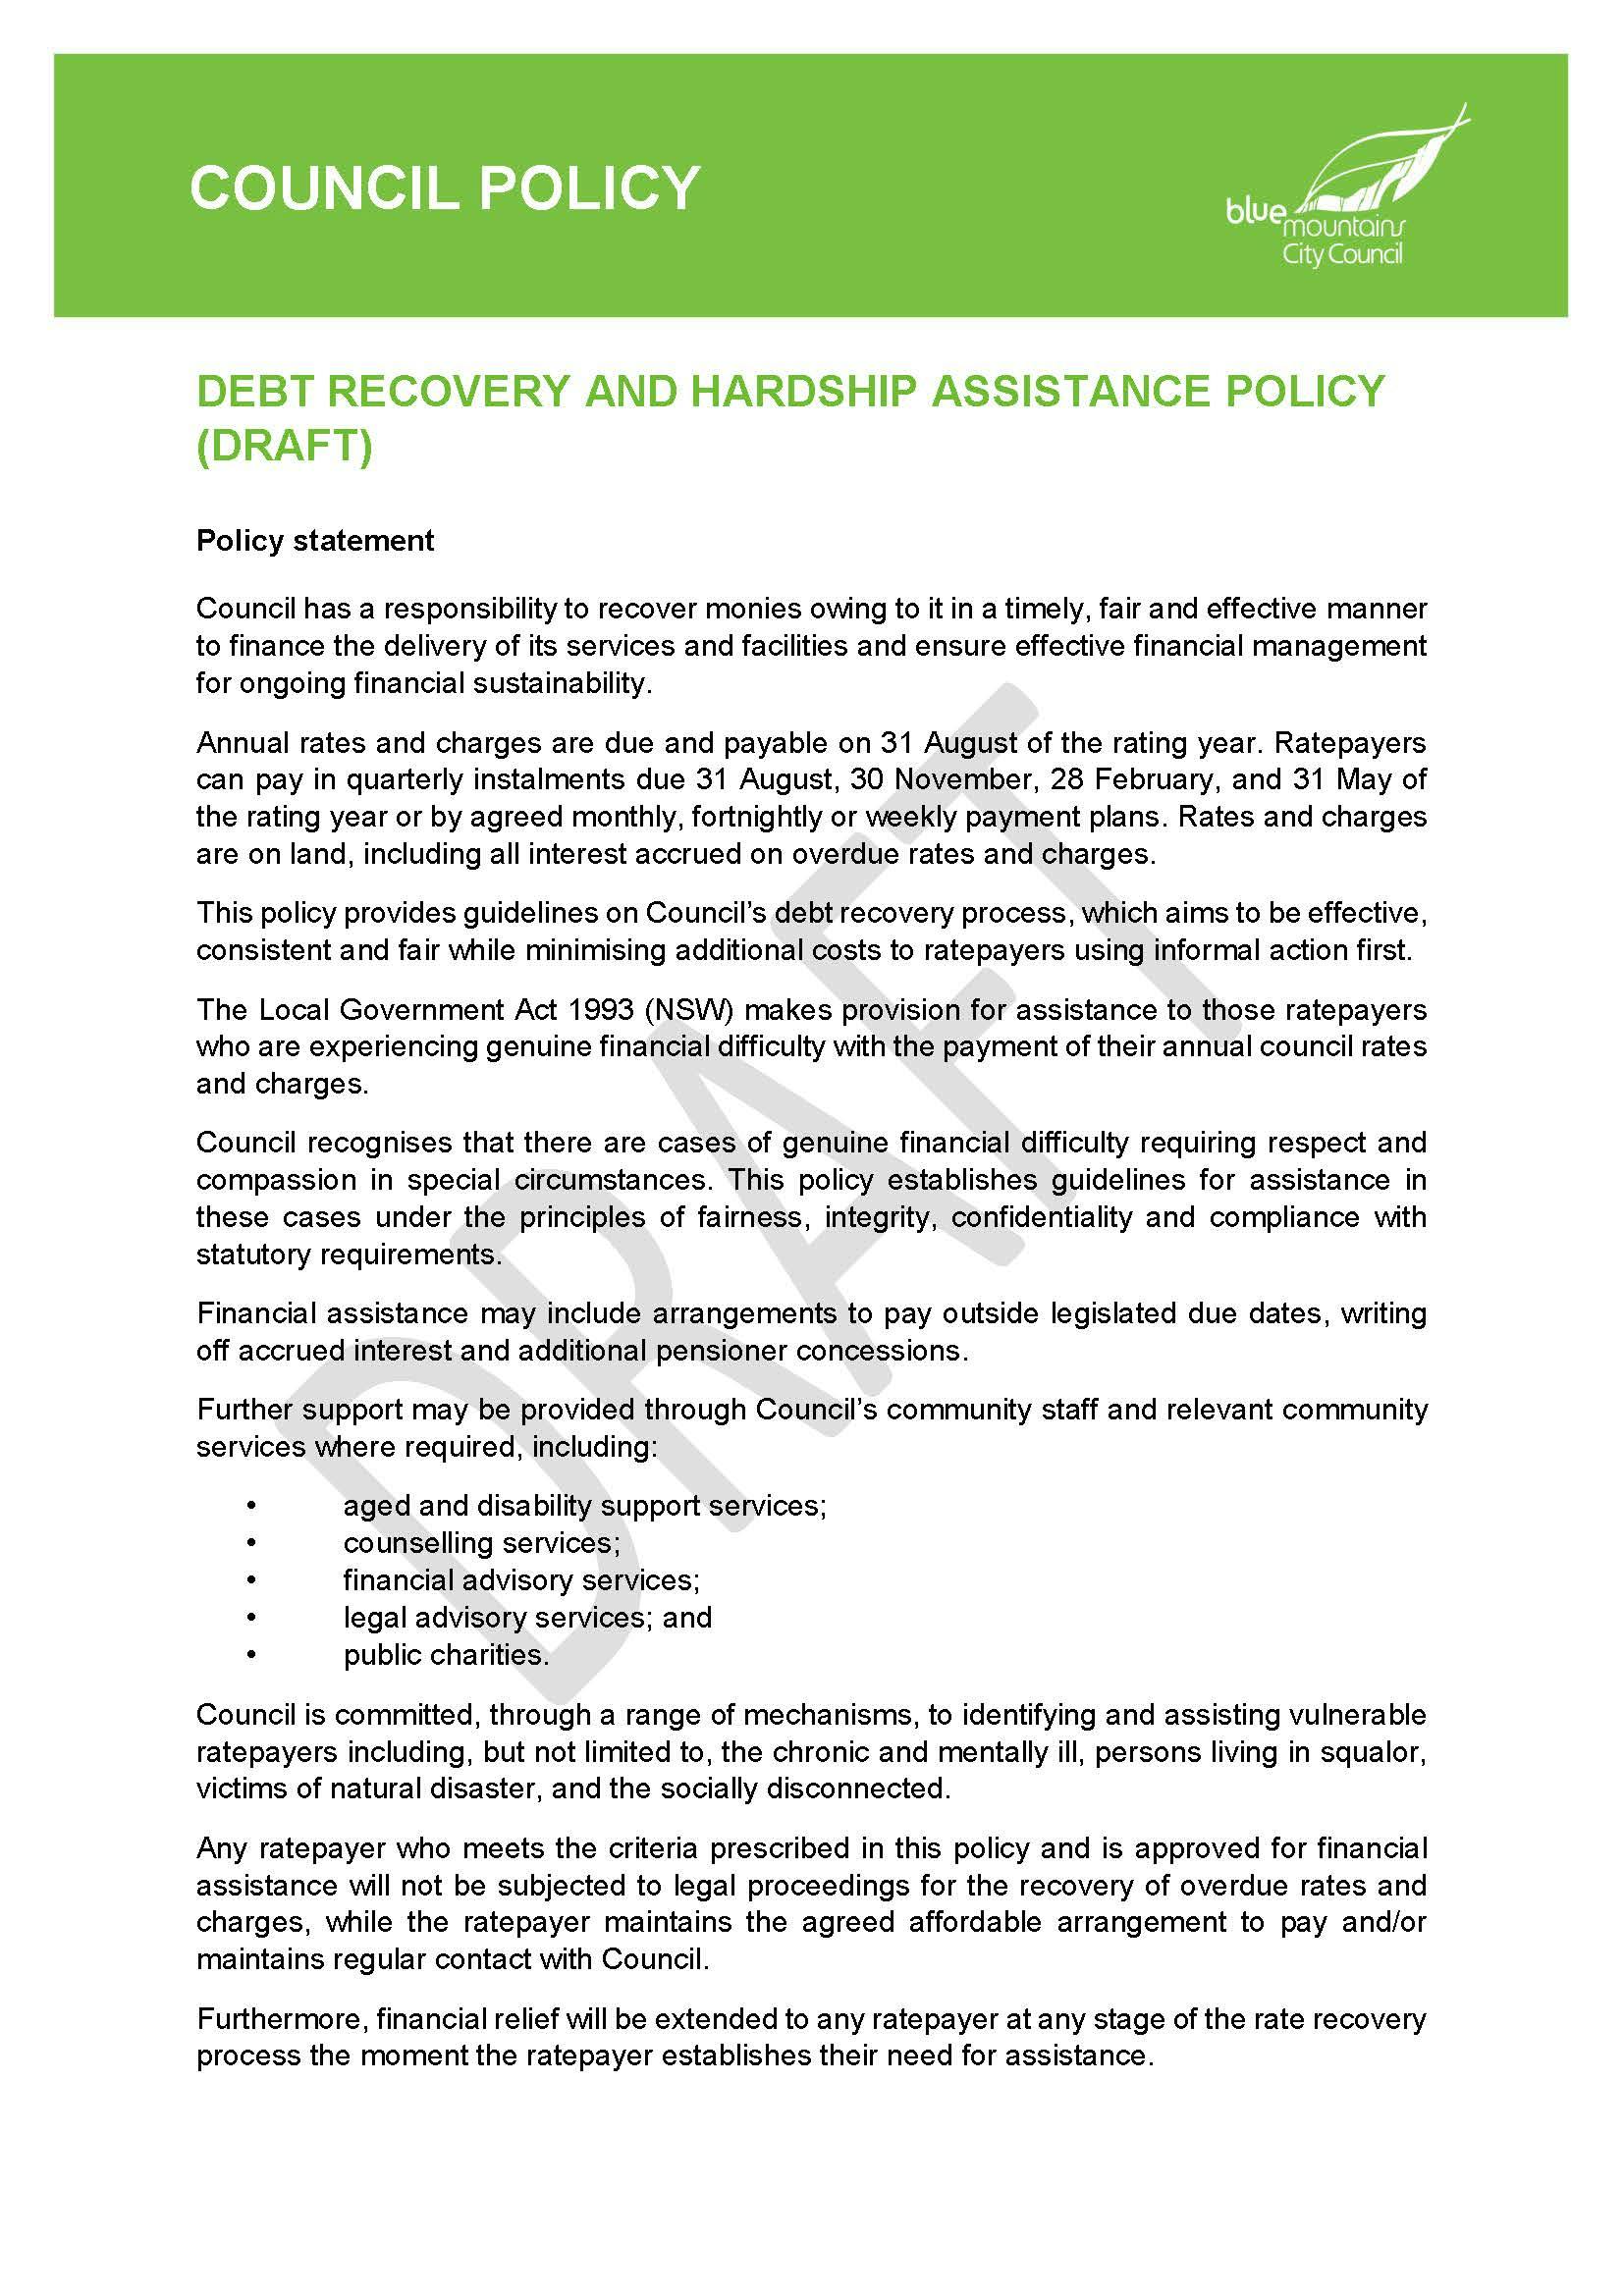 Draft Debt Recovery & Hardship Assistance Policy